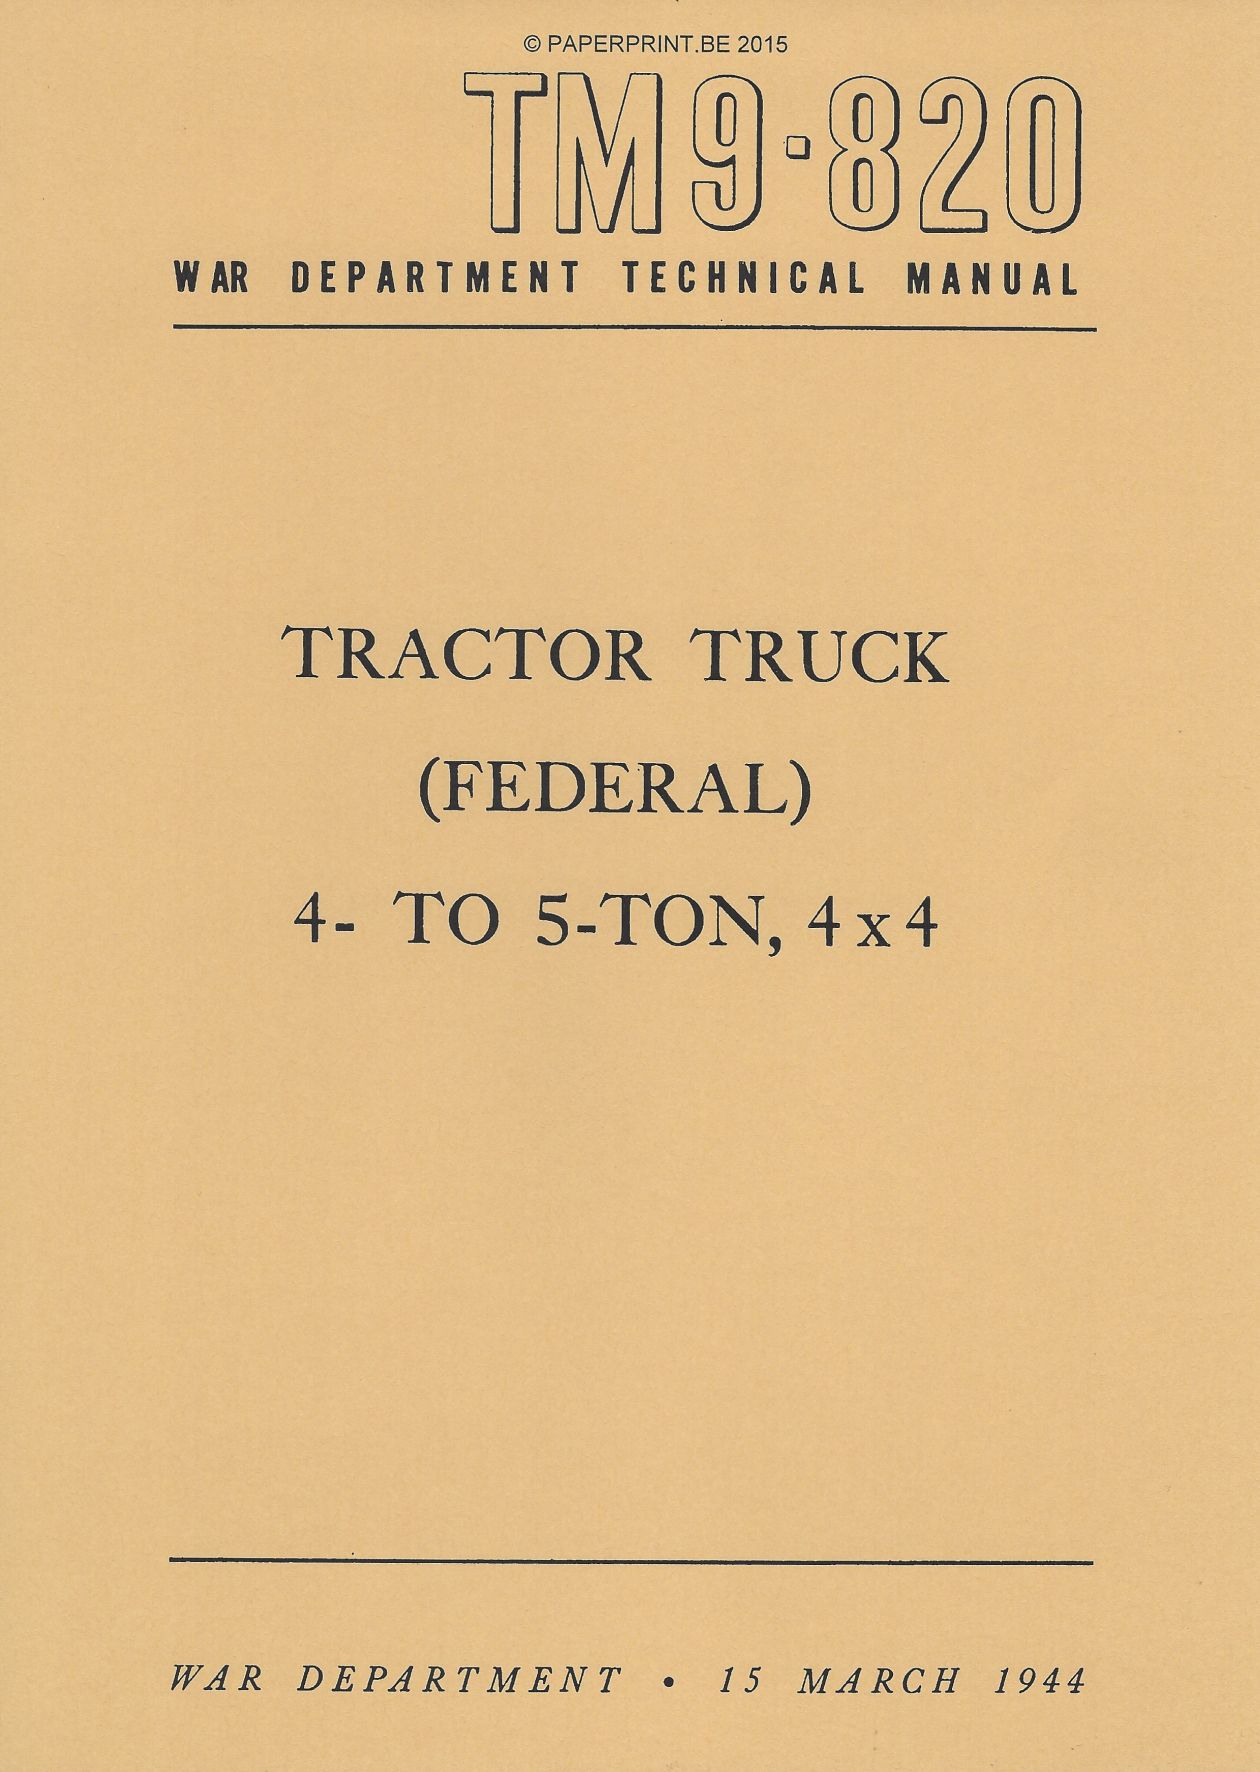 TM 9-820 US FEDERAL 4- TO 5-TON, 4x4 TRACTOR TRUCK